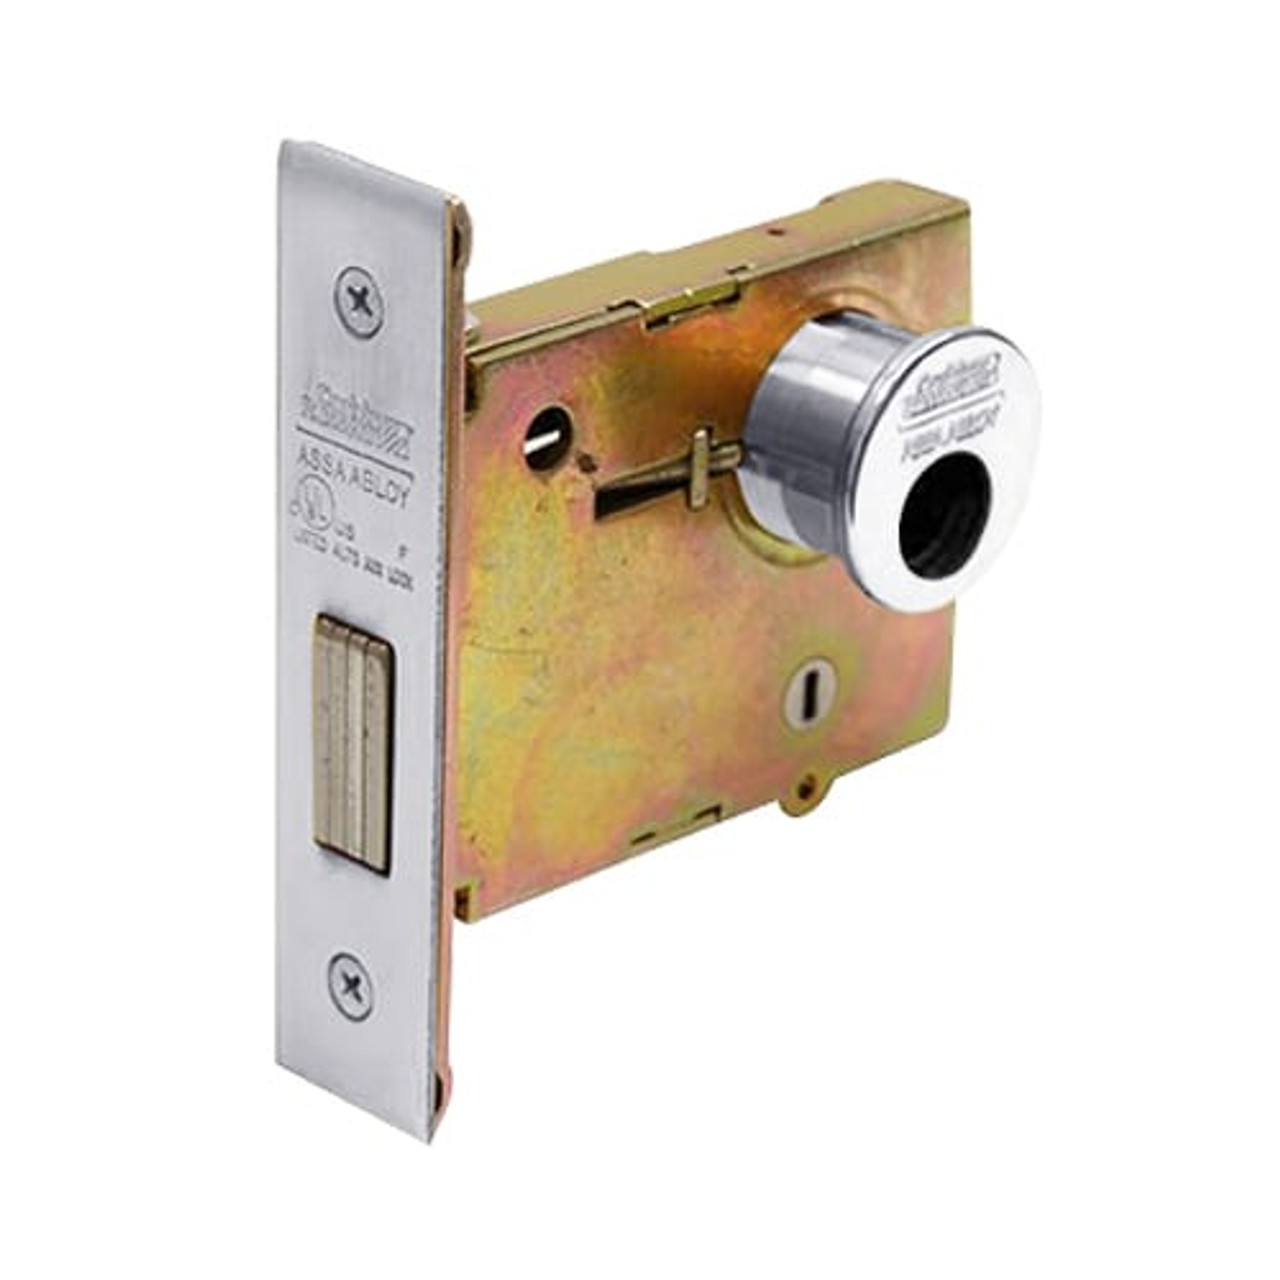 DL4122-625-LC Corbin DL4100 Series Mortise Deadlocks with Double Cylinder w/ Thumbturn in Bright Chrome Finish